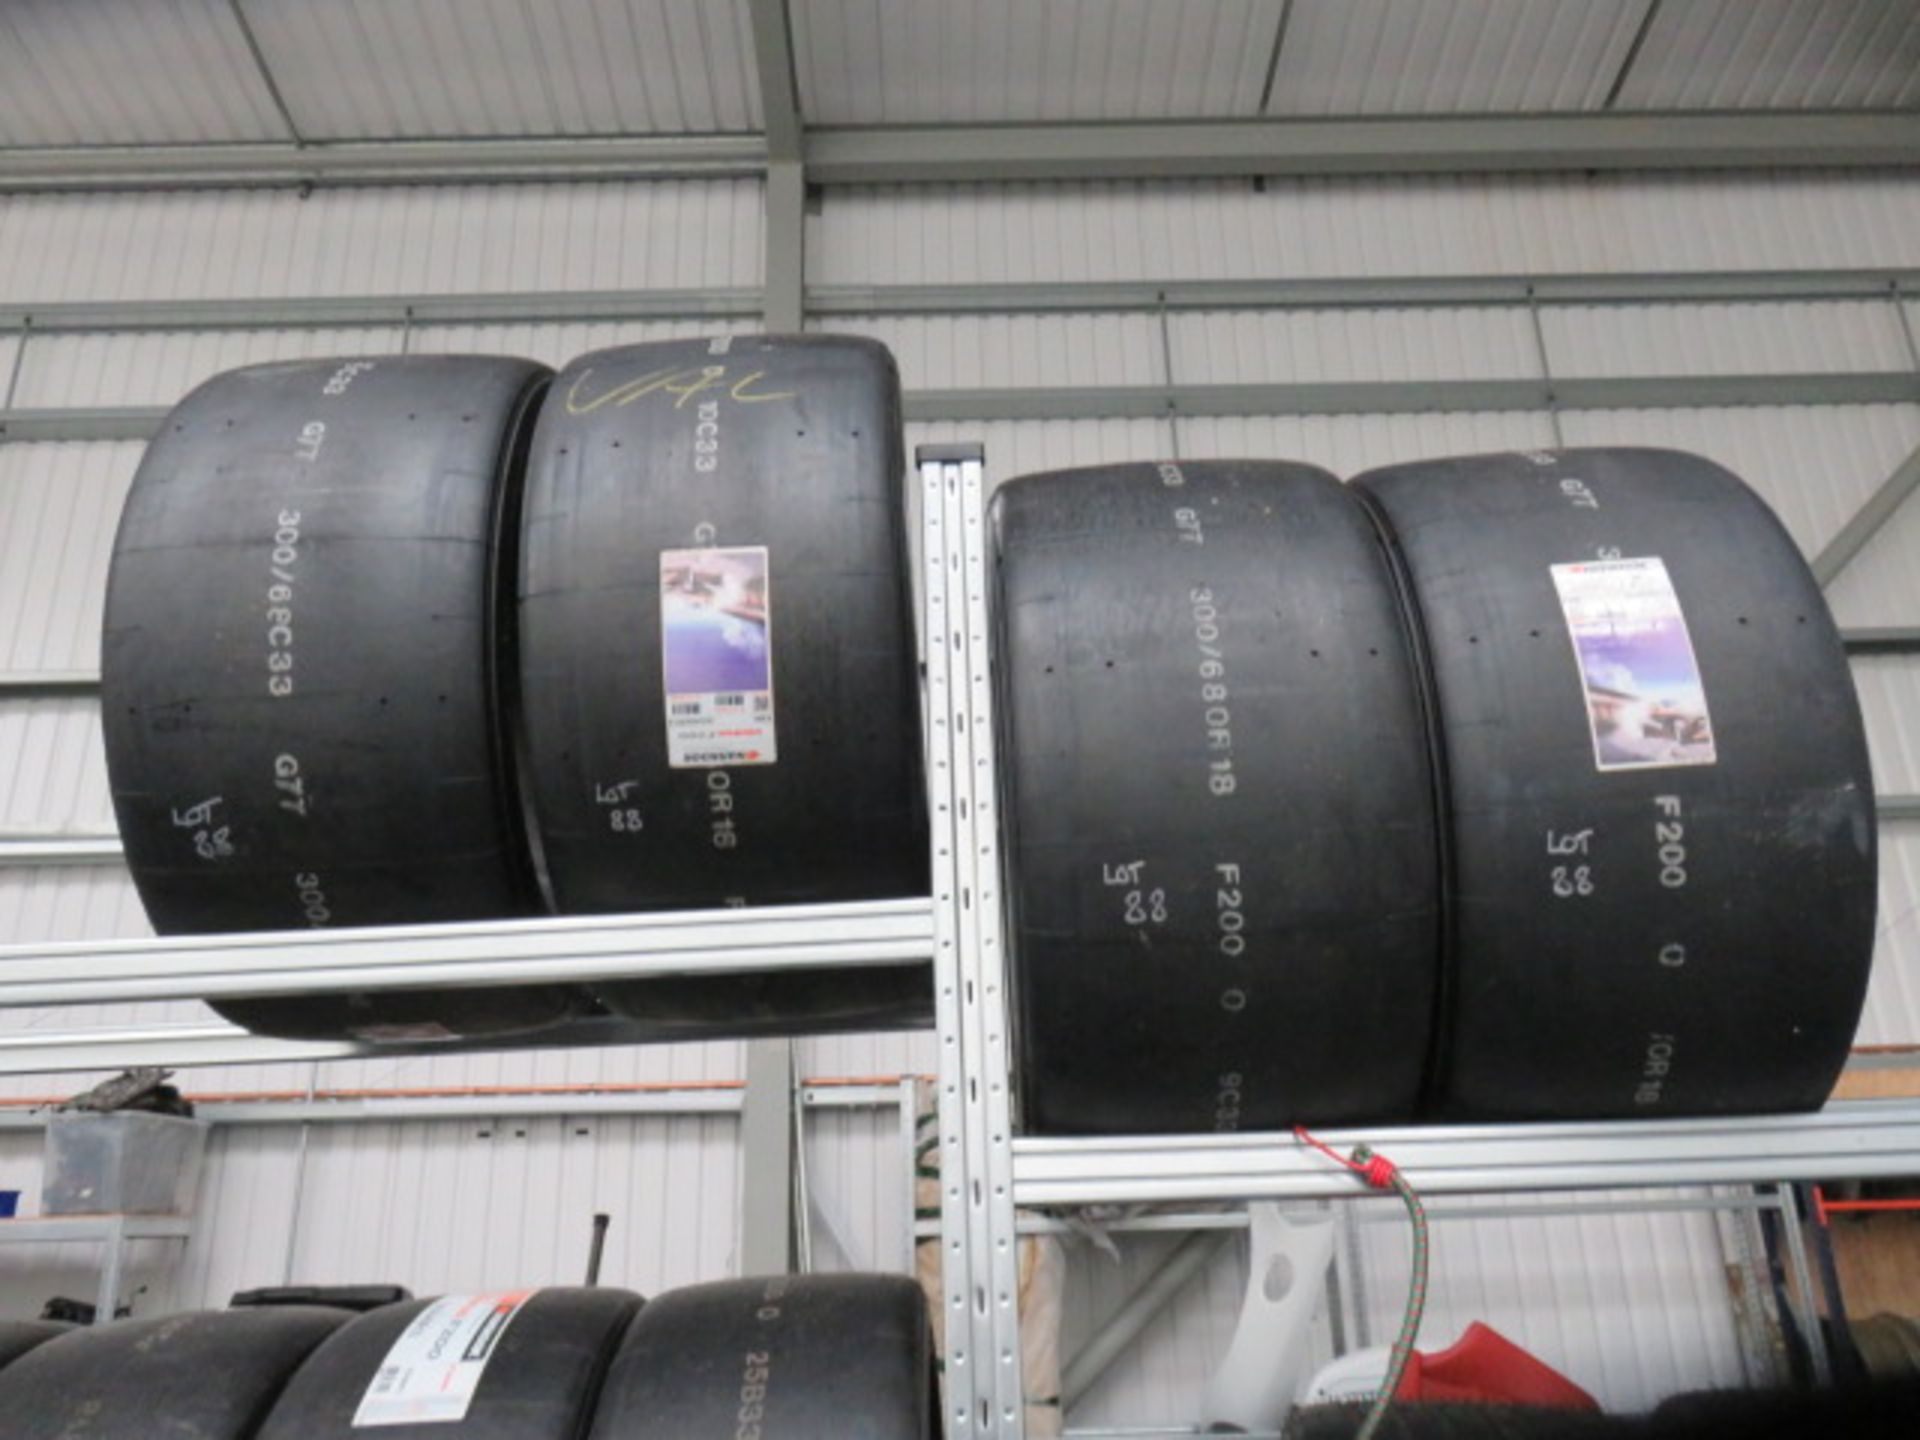 4 x New Hankook 300/680LR18 Slick Racing Tyres Compound F200 As Lotted